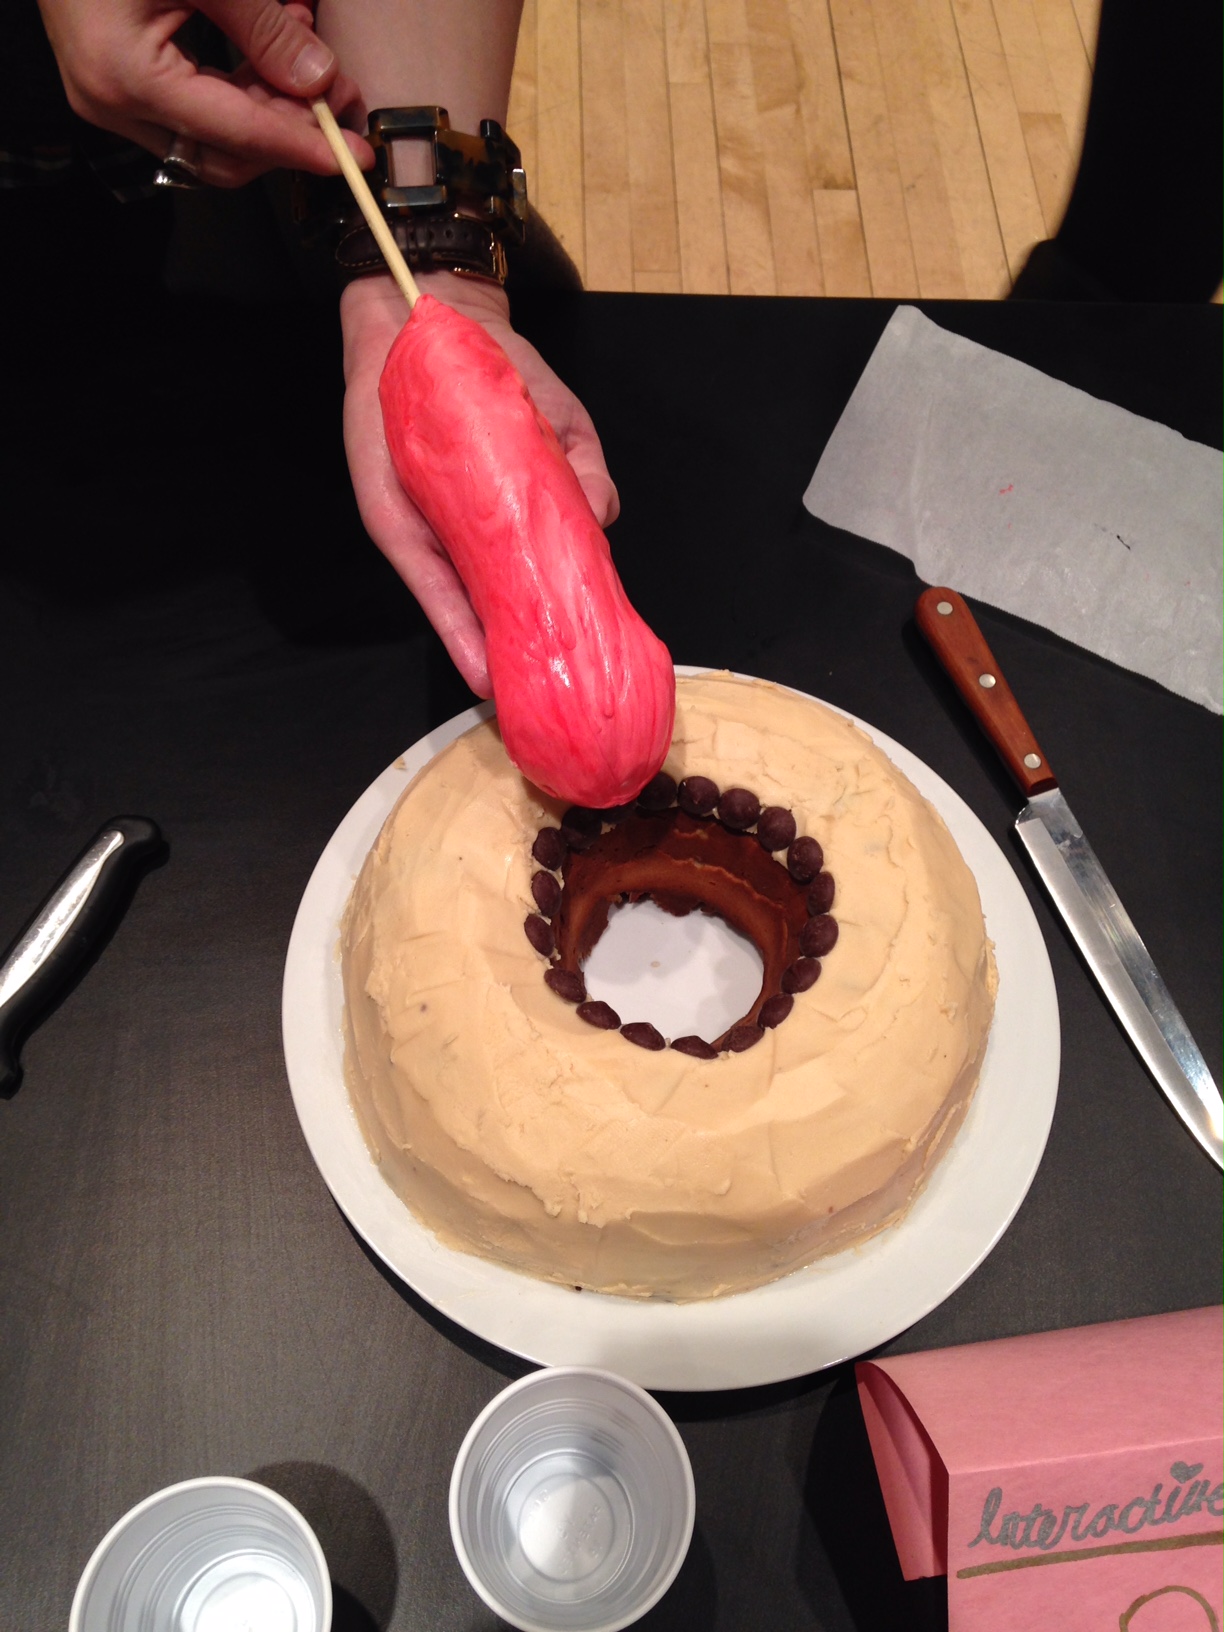 Fifty Recipes Of Cake-rotica: The Erotic Cake Competition.